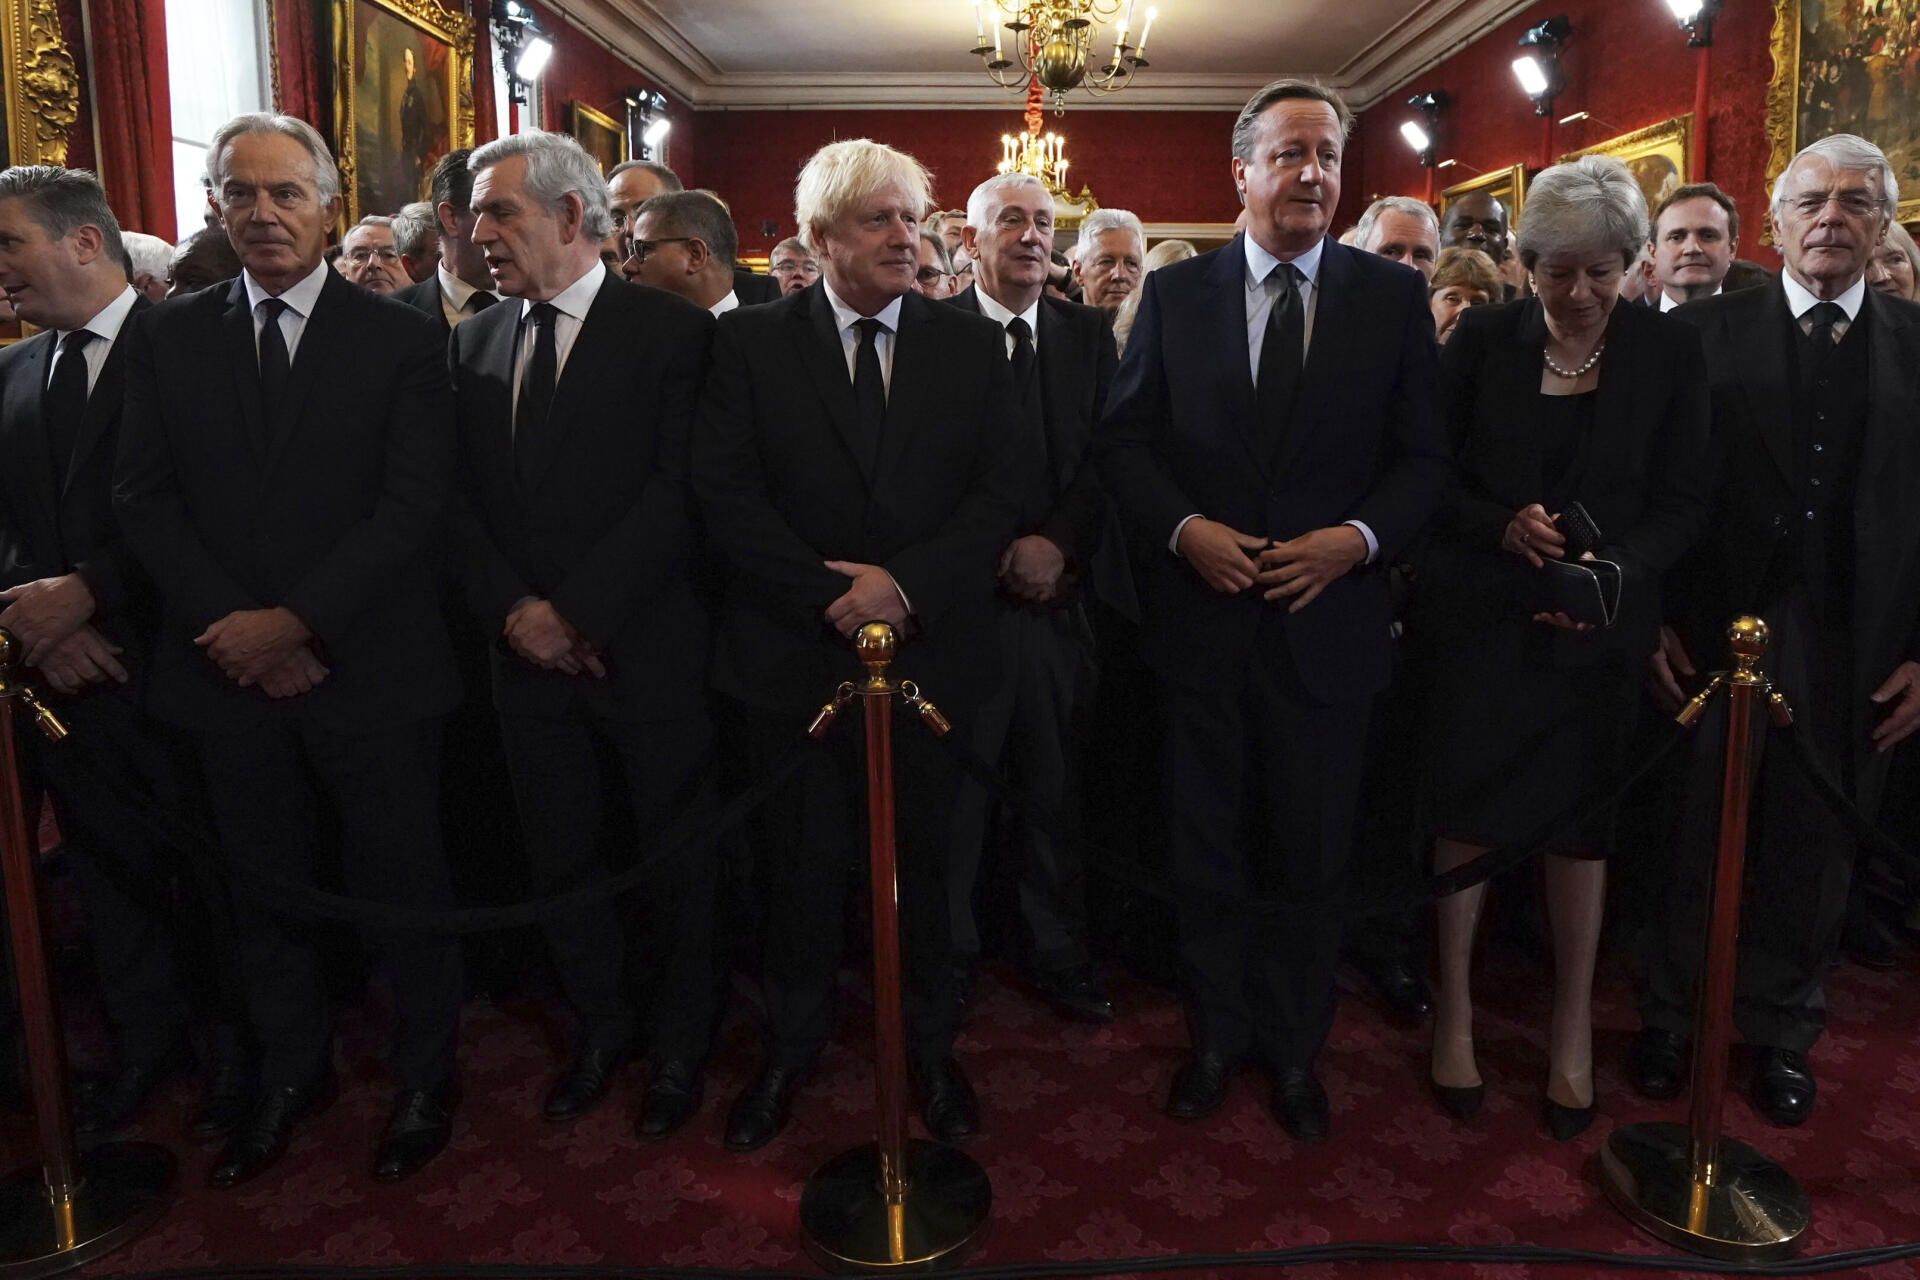 From left to right, Labour Party leader Keir Starmer and former prime ministers Tony Blair, Gordon Brown, Boris Johnson, David Cameron, Theresa May and John Major before the Membership Council ceremony at St James's Palace, London. The speaker of the House of Commons, Lindsay Hoyle, stands in the second row. September 10, 2022.